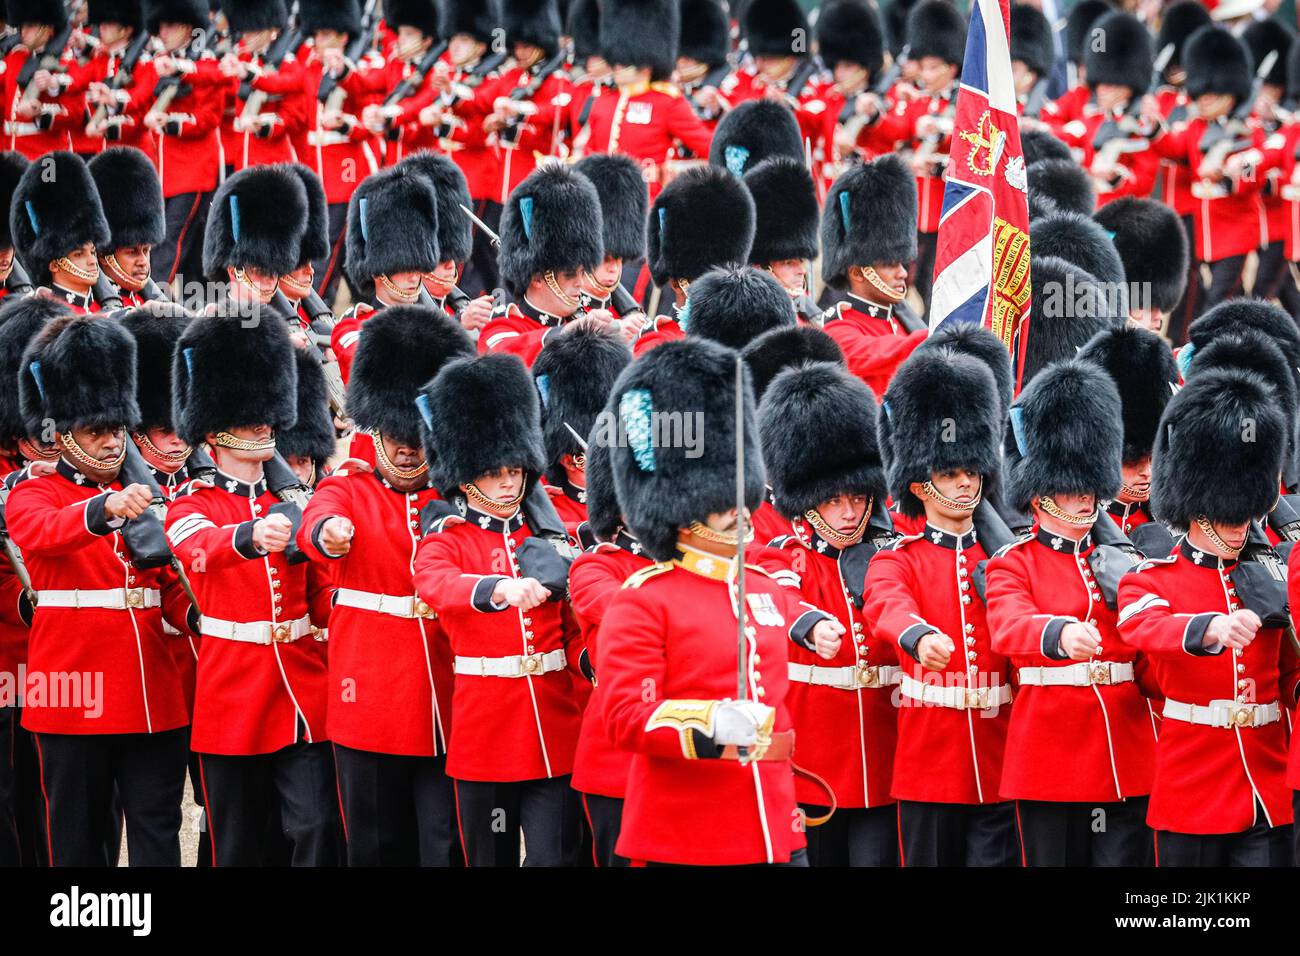 London, UK, 28th May 2022. The Colonel's Review of Trooping the Colour, guards in traditional red uniform and bear skin hat marching, London, England Stock Photo